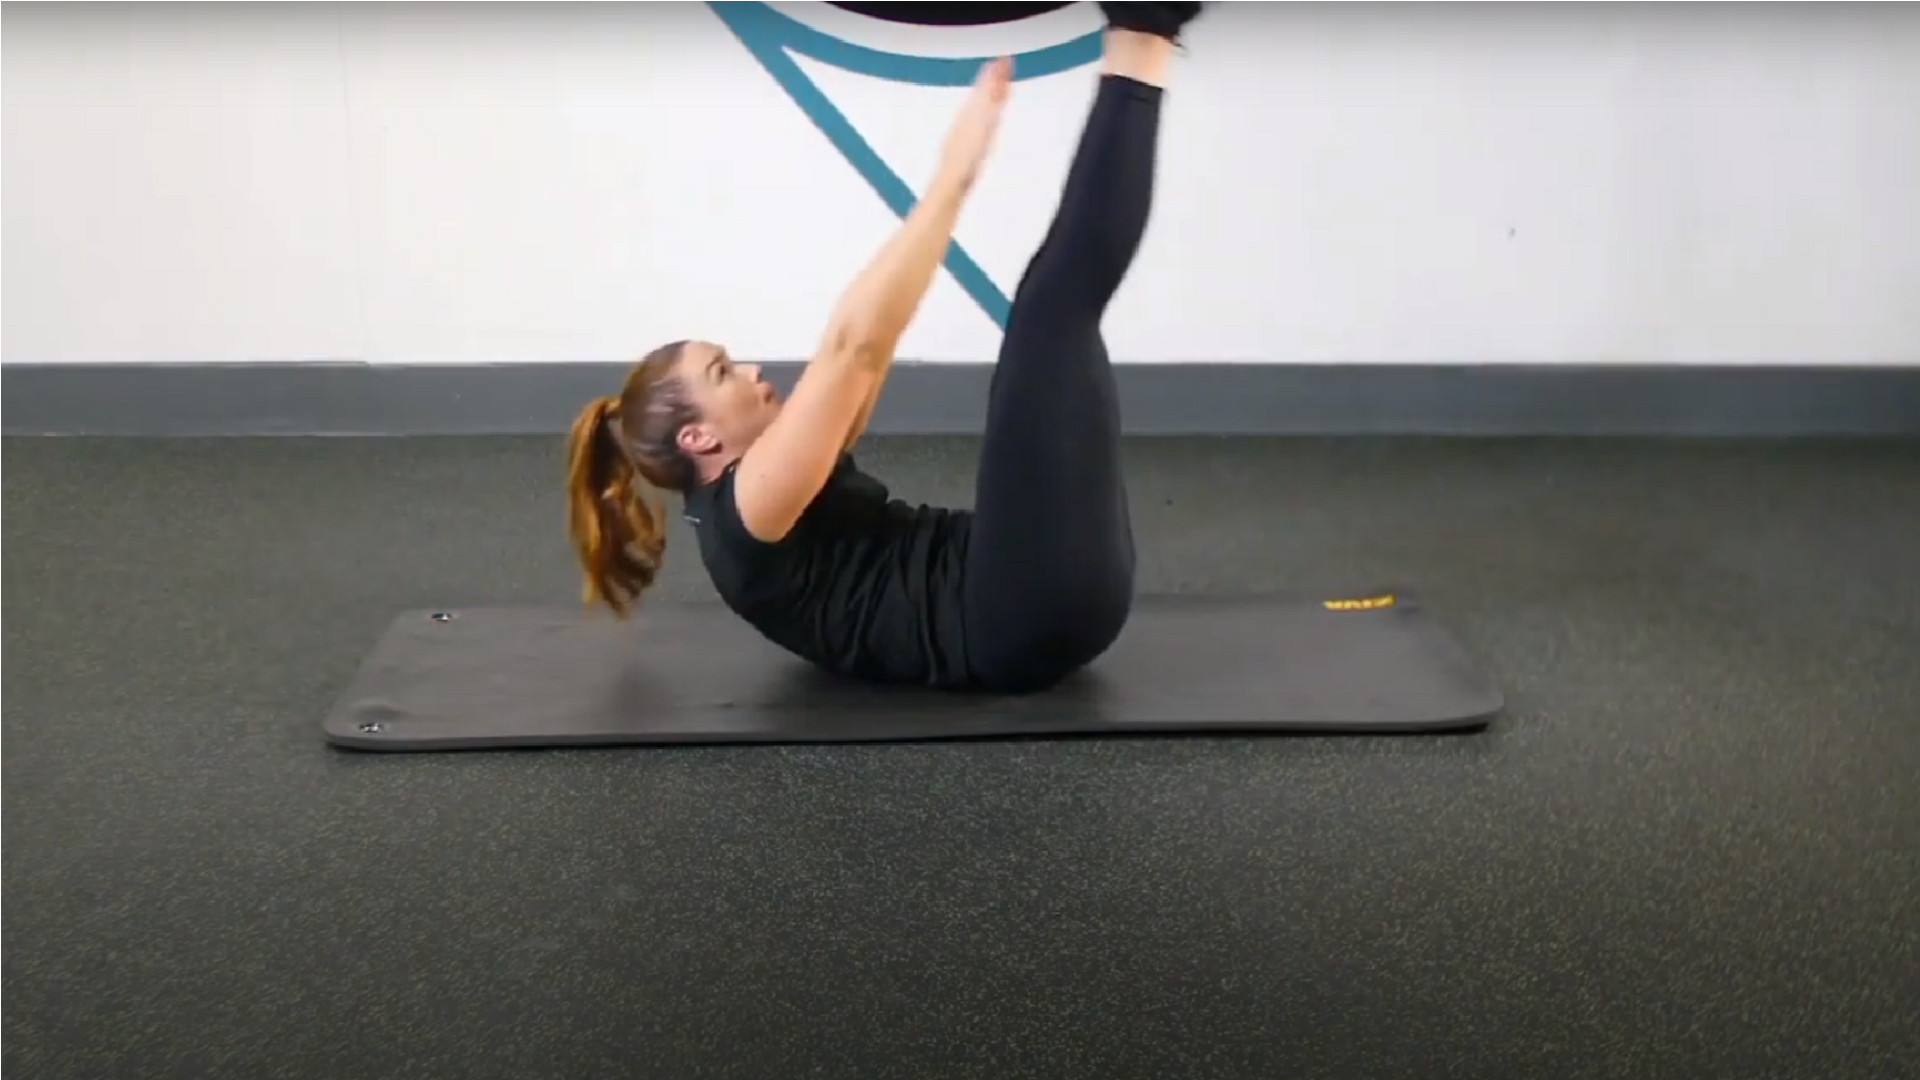 Get flatter abs with the V-sit exercise